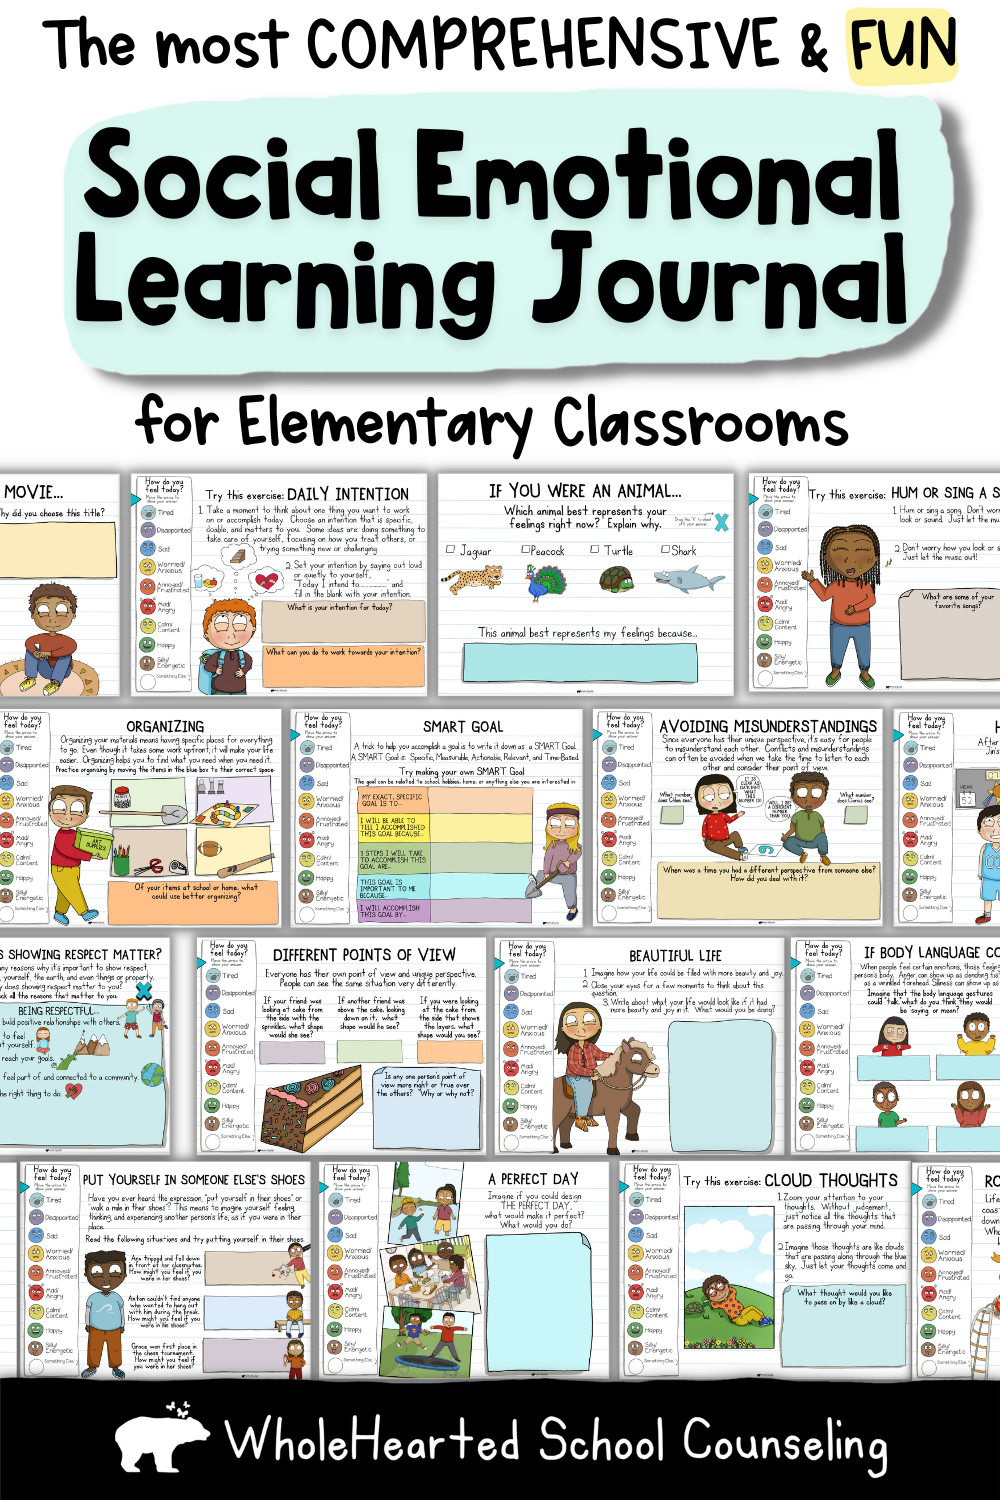 Social Emotional Learning Journal pages